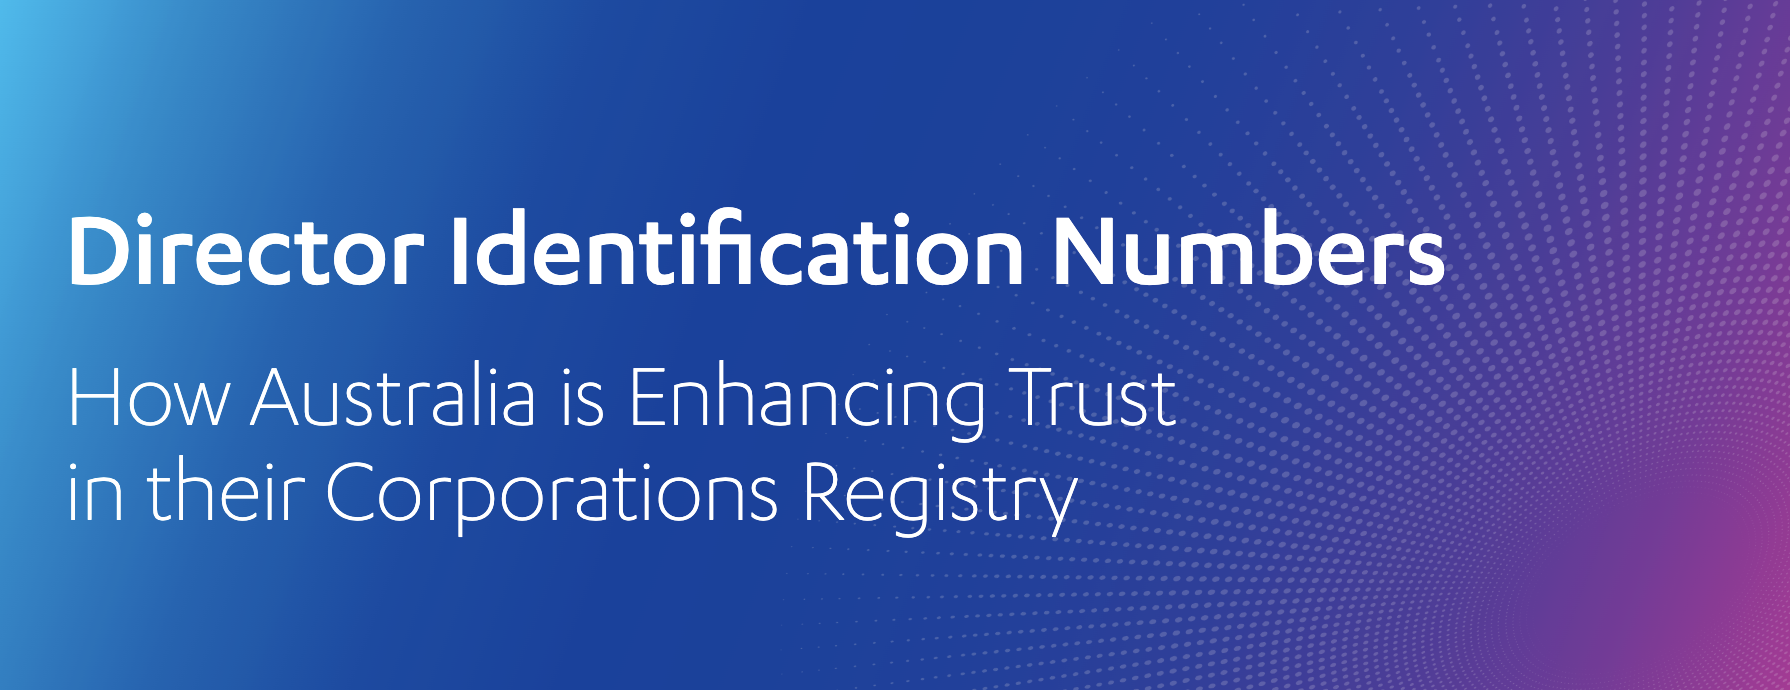 Director Identification Numbers – How Australia is Enhancing Trust in their Corporations Registry